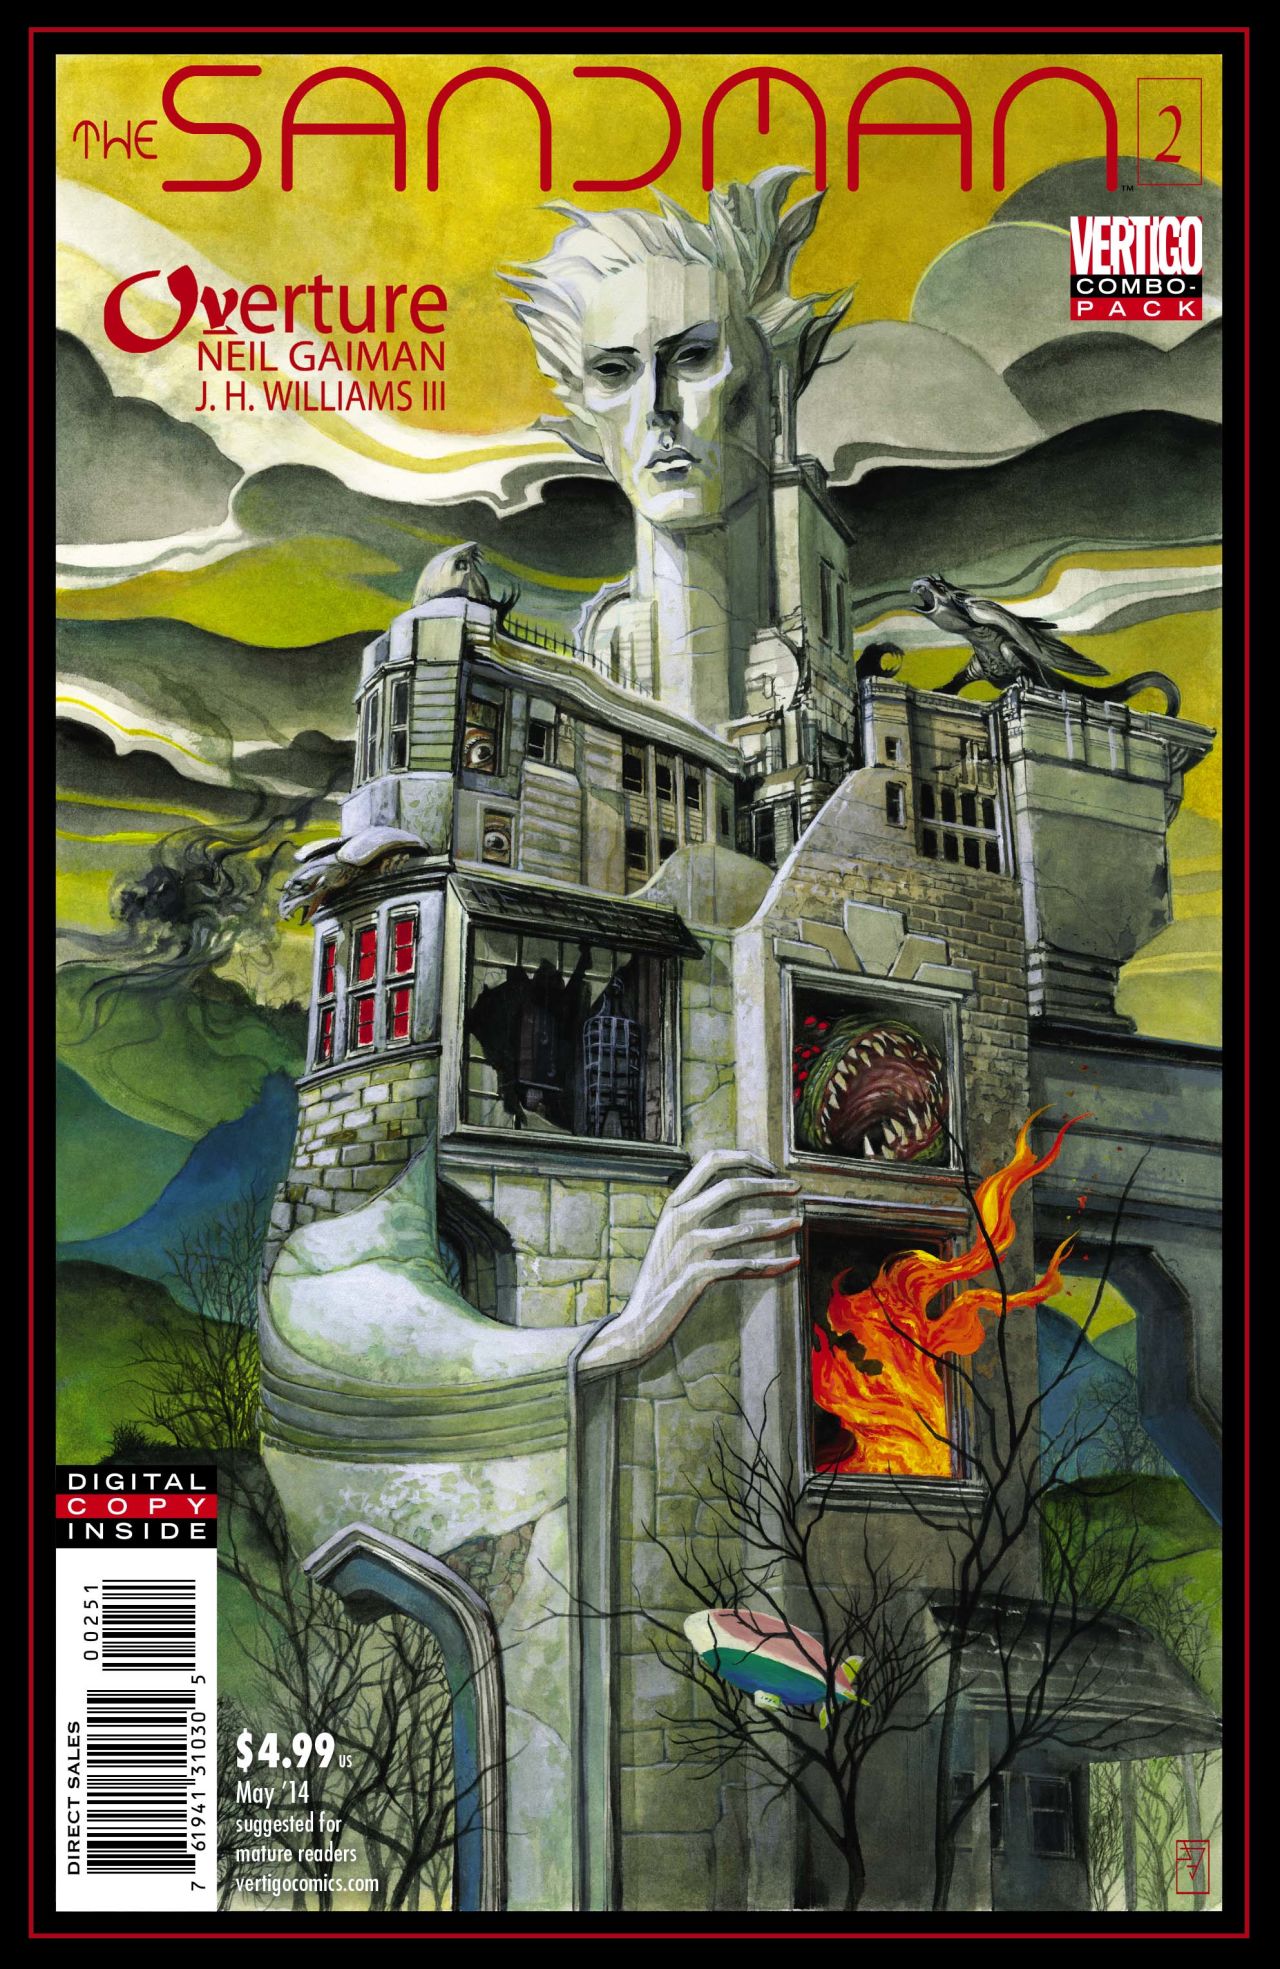 The second issue of "Sandman: Overture," the first "Sandman" comic book from acclaimed author Neil Gaiman in 10 years, comes out on Wednesday and CNN has an exclusive look at the first five pages. This cover for the issue is representative of the surreal, unusual artwork the series is known for. "Sandman: Overture" will be a six-issue miniseries.